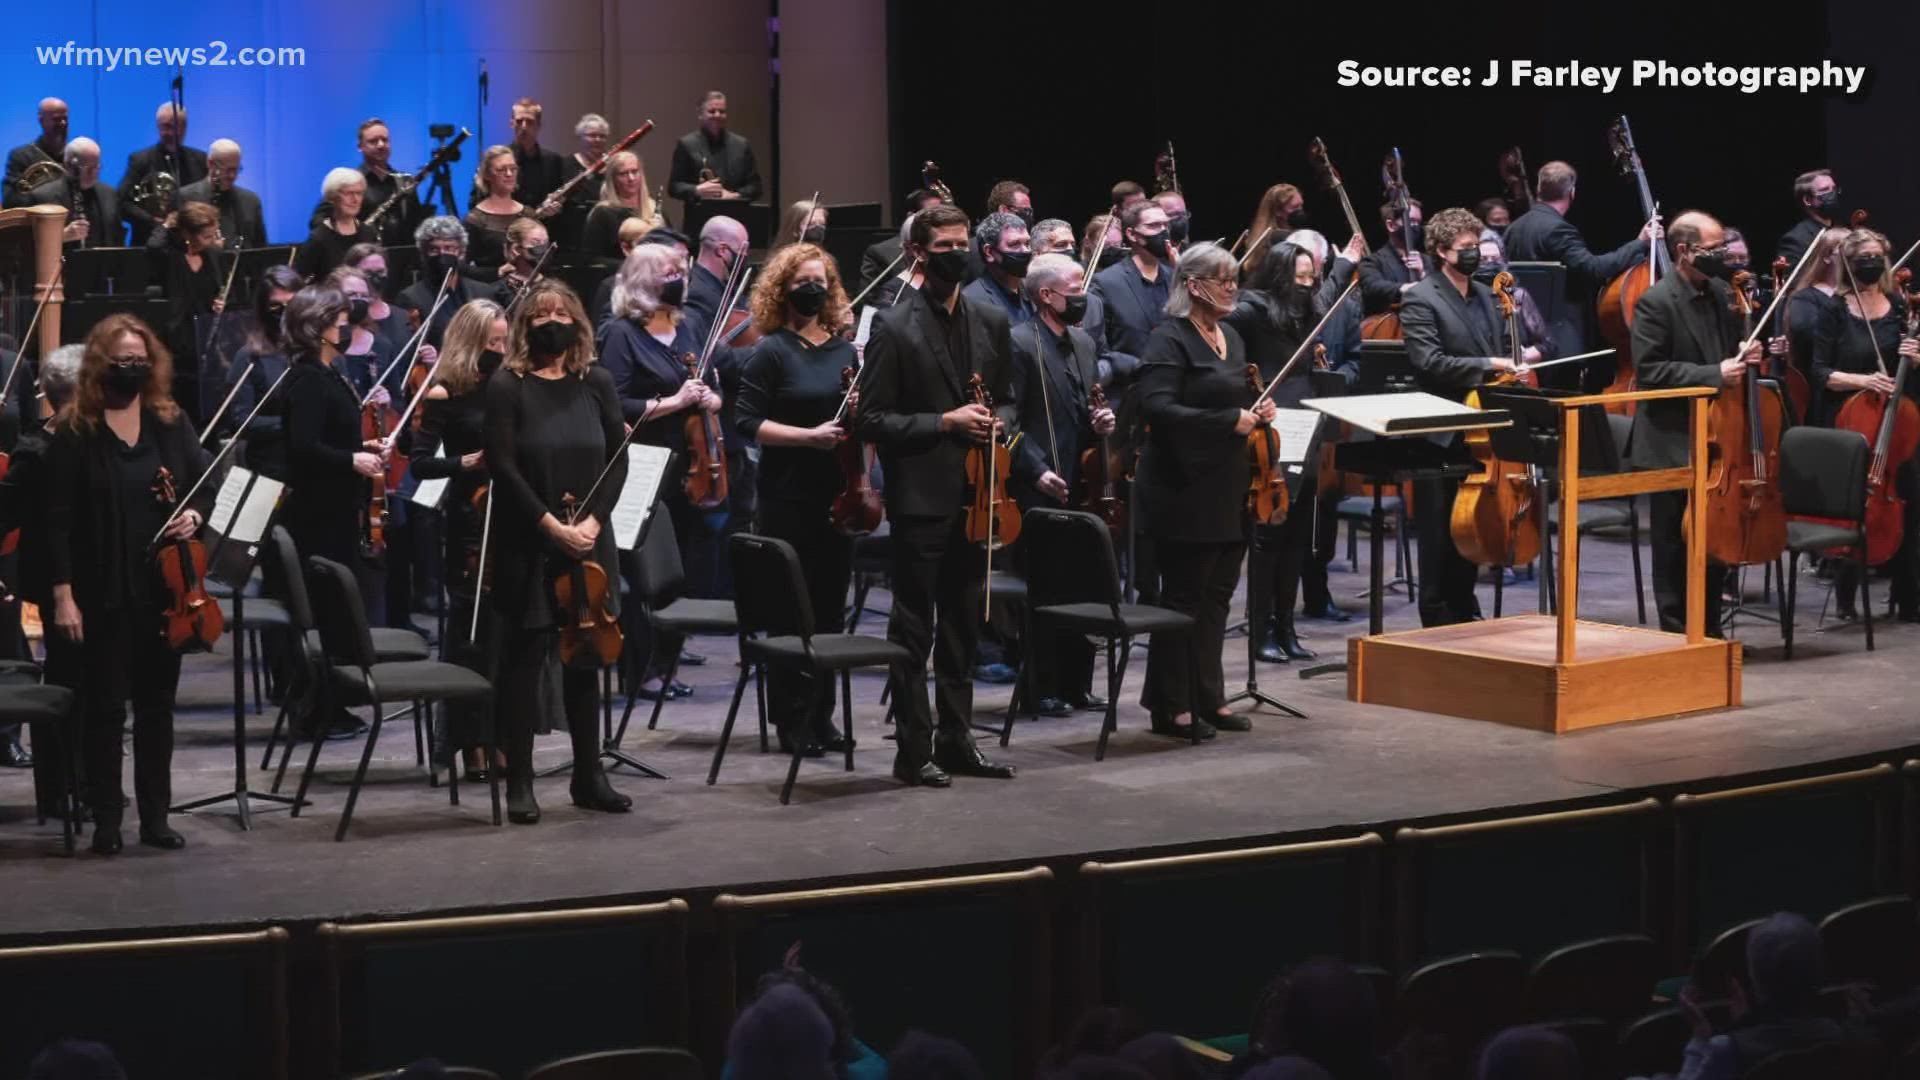 The Winston-Salem Symphony is celebrating its 75th anniversary with guest conductor Joann Falleta.